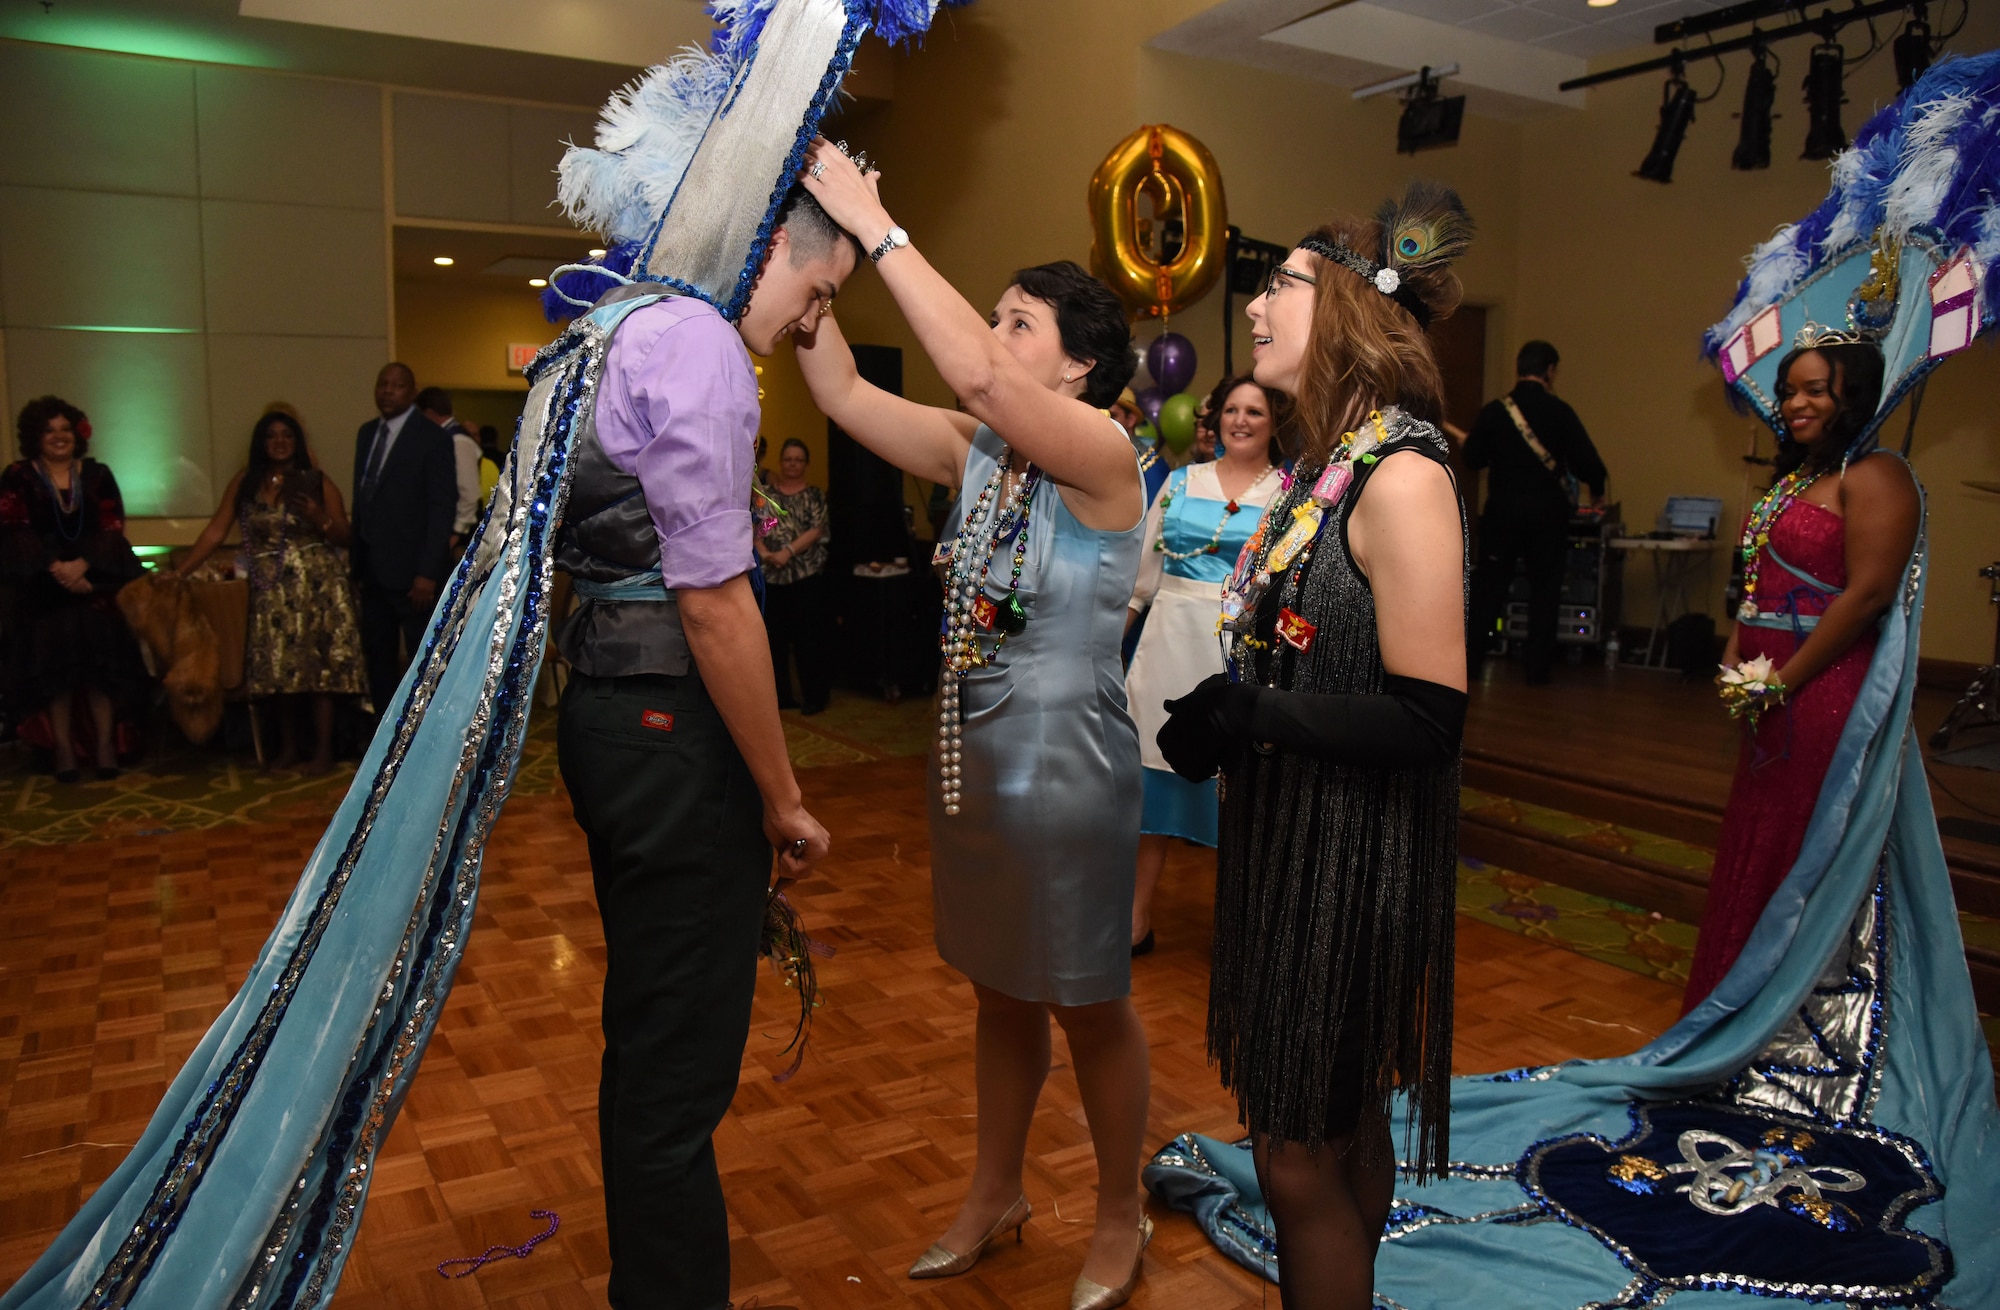 Col. Jeannine Ryder, 81st Medical Group commander, crowns Airman John Shelby, 81st Diagnostic and Therapeutics Squadron, as the 2018 Krewe of Medics king as Chief Master Sgt. Julie Bottroff, 81st MDG superintendent, looks on during the 30th Annual Krewe of Medics Mardi Gras Ball at the Bay Breeze Event Center Feb. 3, 2018, on Keesler Air Force Base, Mississippi. The Krewe of Medics hosts a yearly ball to give Keesler Medical Center personnel a taste of the Gulf Coast and an opportunity to experience a traditional Mardi Gras. The theme for this year's ball was Read It-Be It. (U.S. Air Force photo by Kemberly Groue)